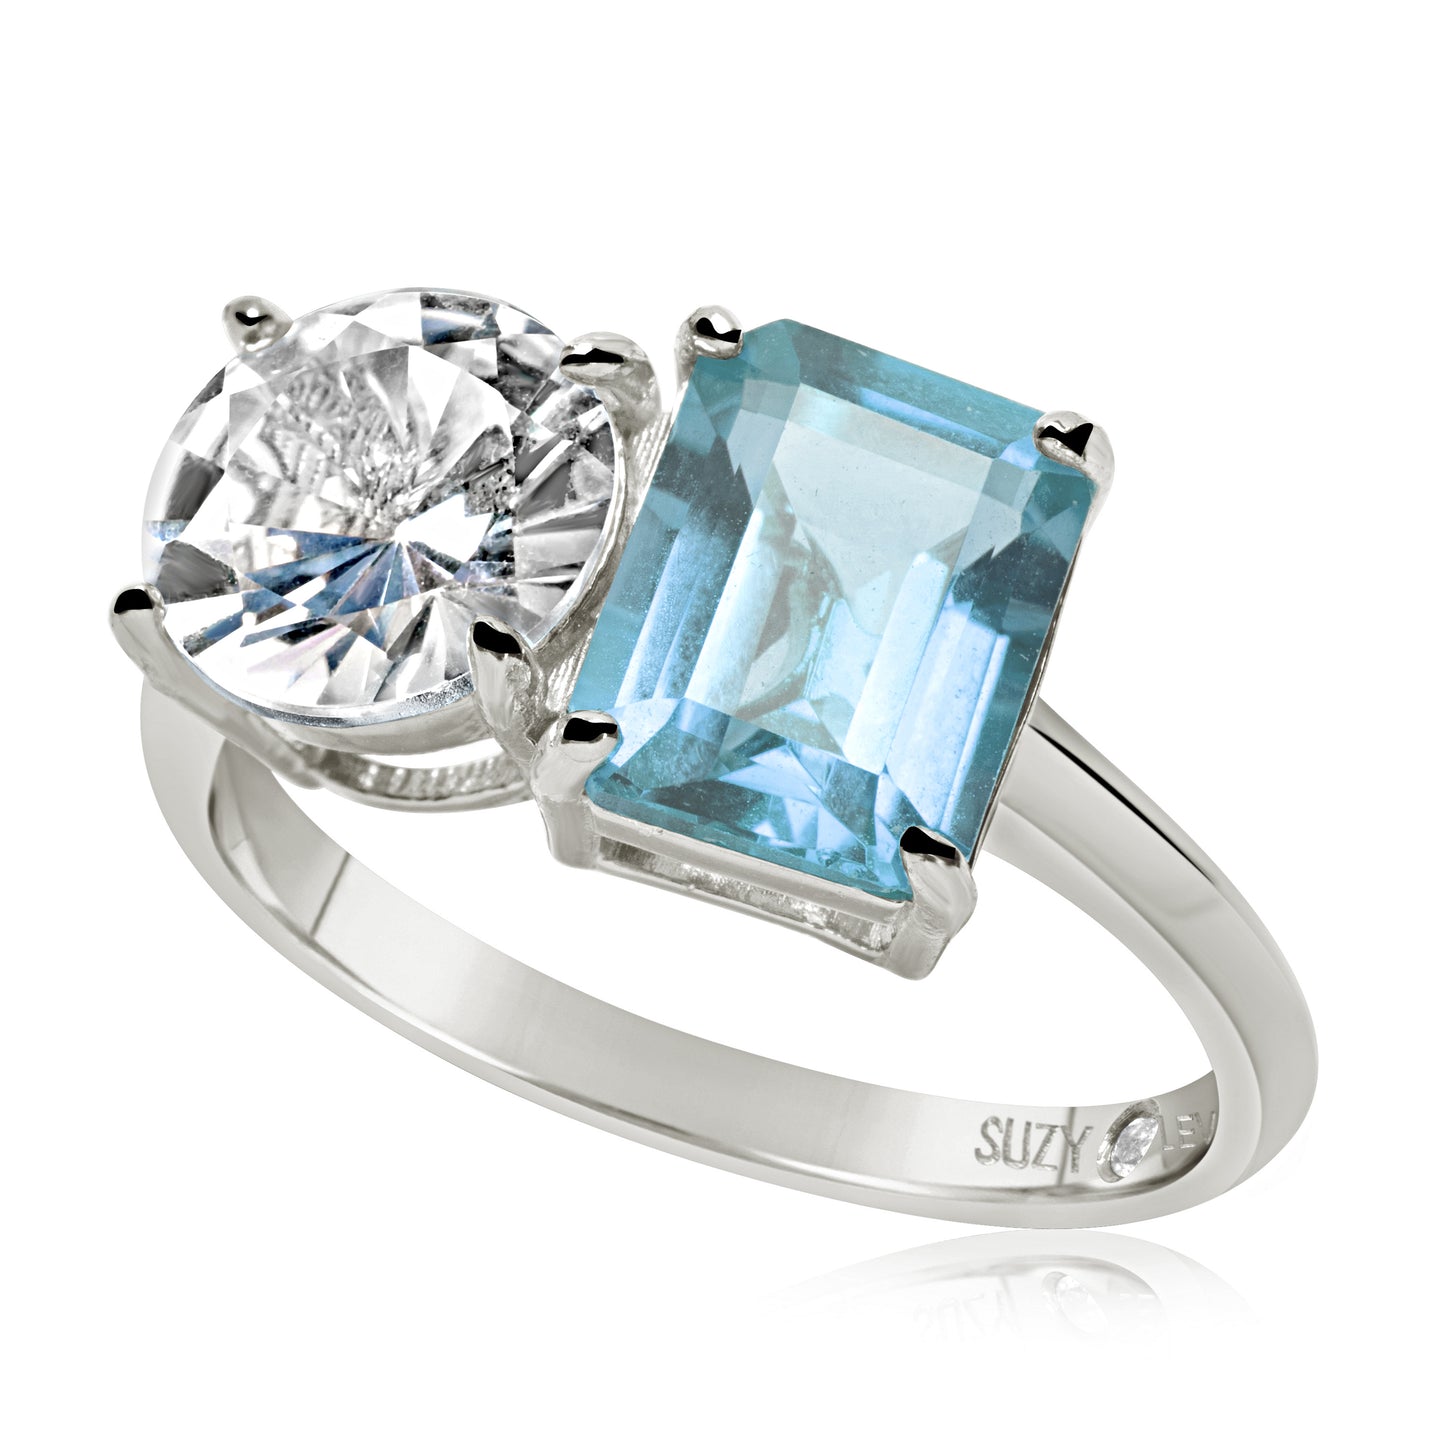 Suzy Levian Sterling Silver White Topaz & Blue Topaz Two Stone Ring